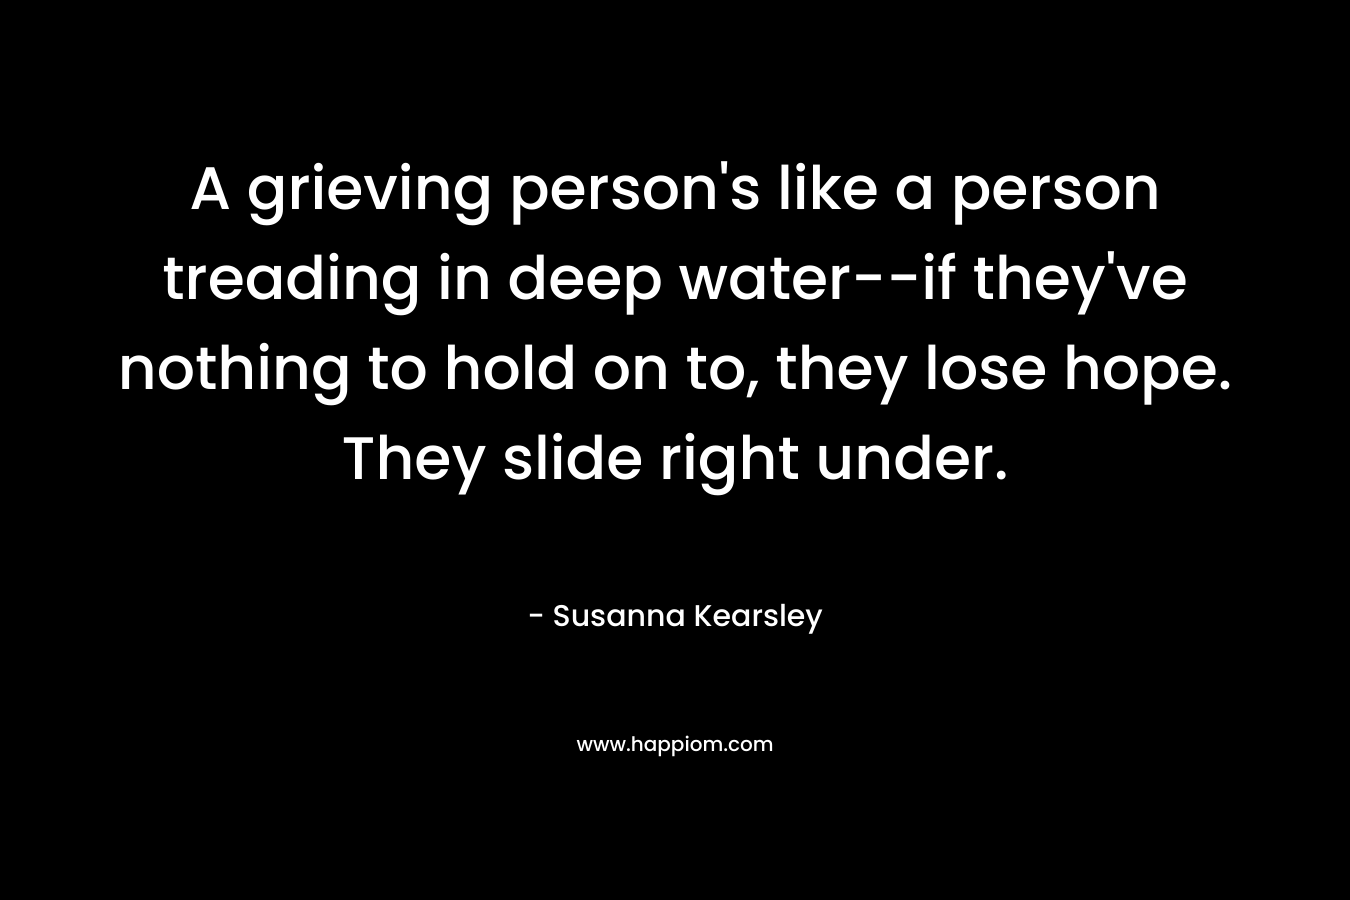 A grieving person's like a person treading in deep water--if they've nothing to hold on to, they lose hope. They slide right under.